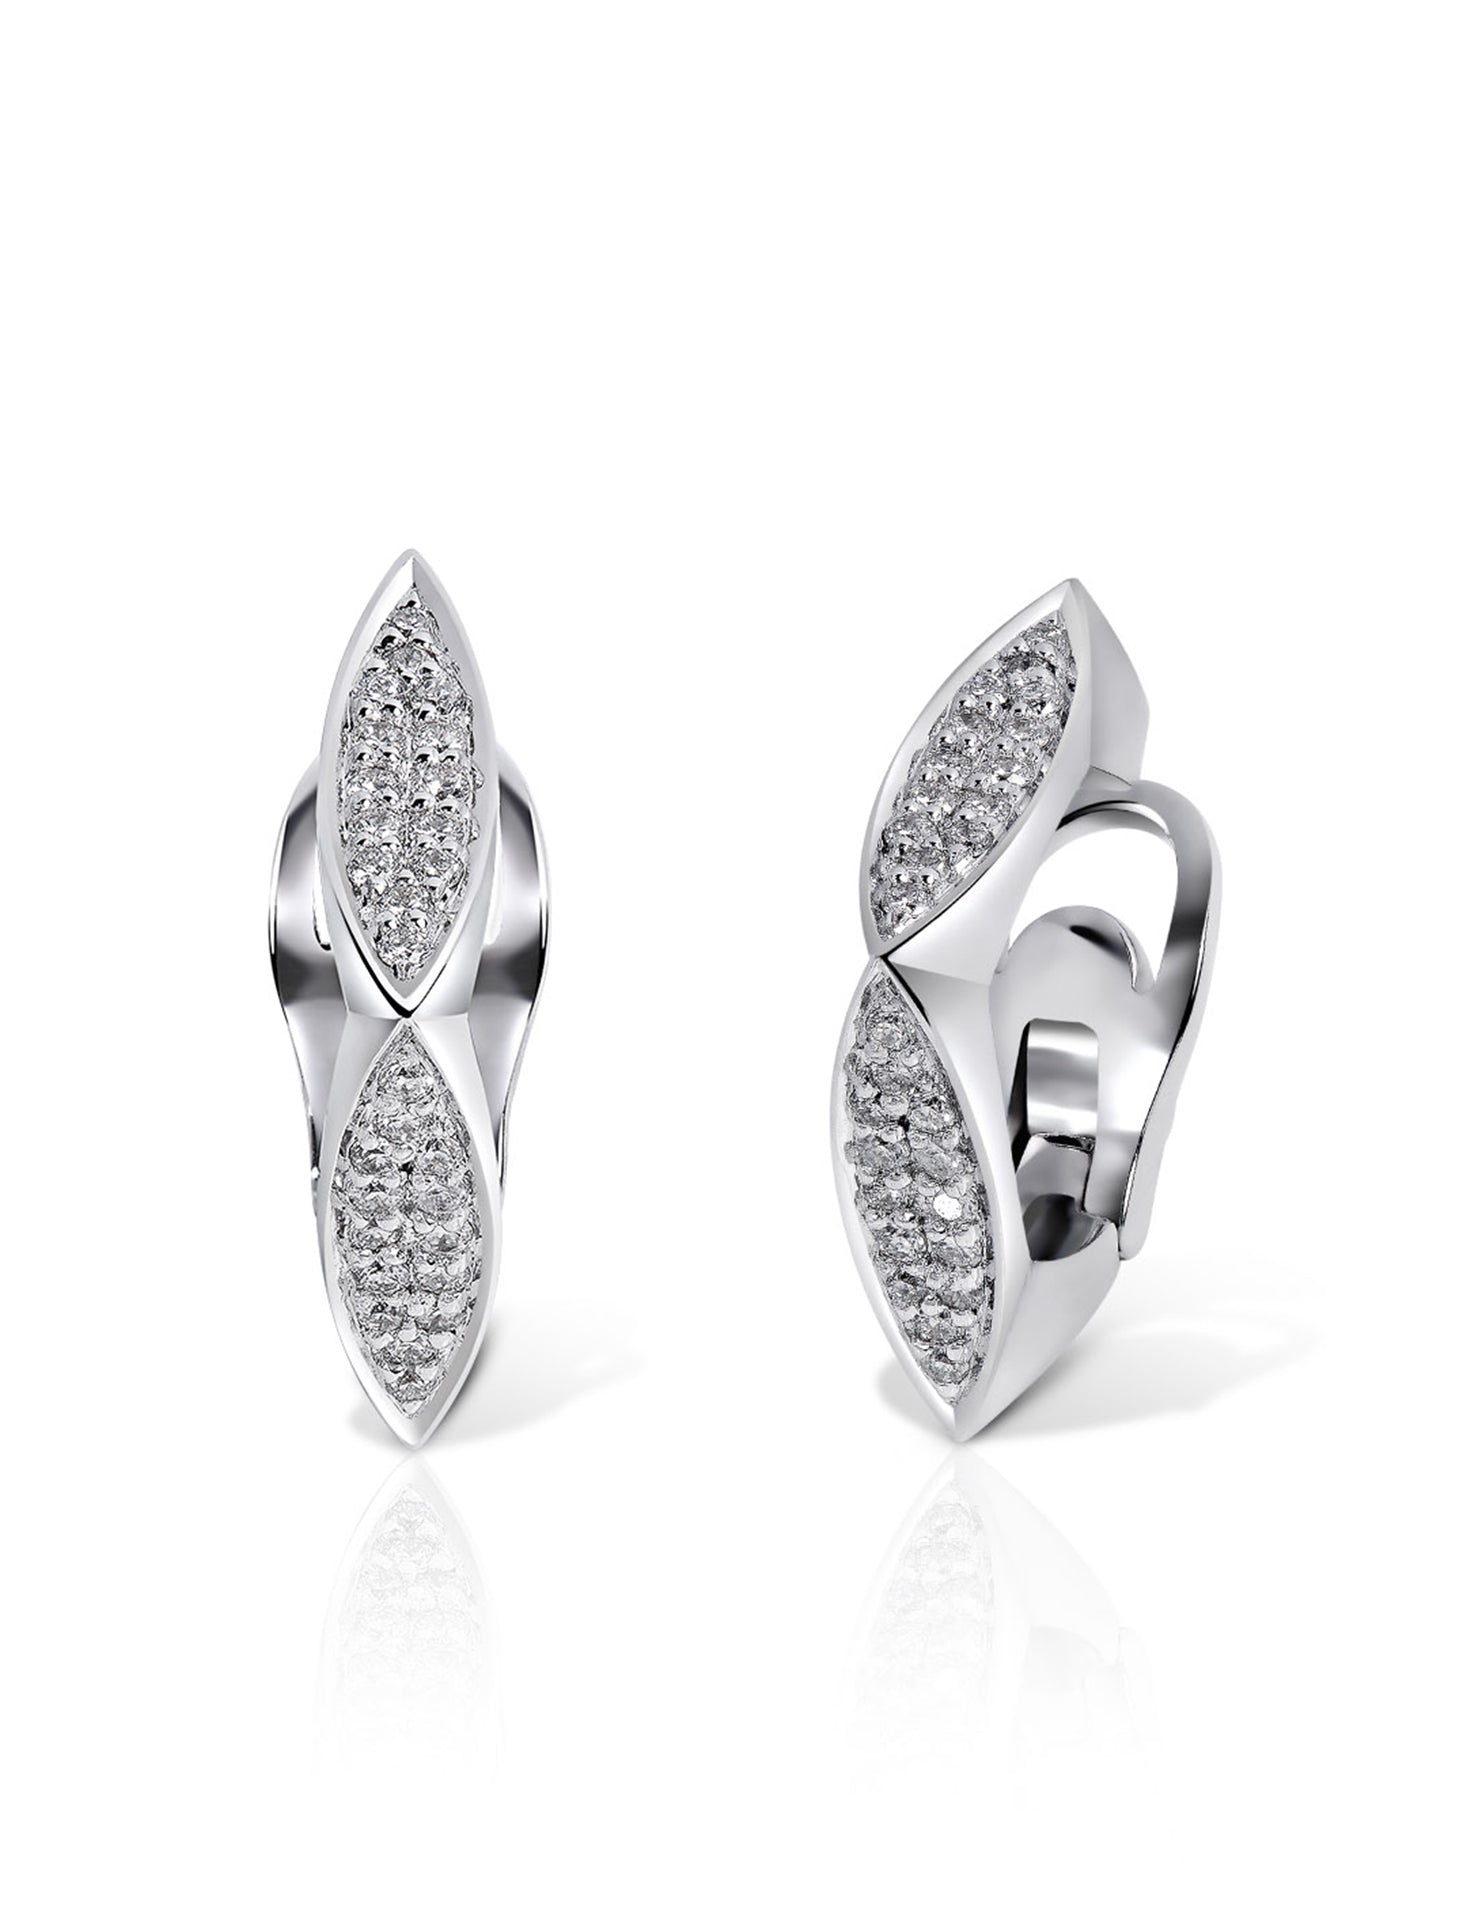 A Visual Guide to Diamond Studs by Carat Weight – Steven Singer Jewelers